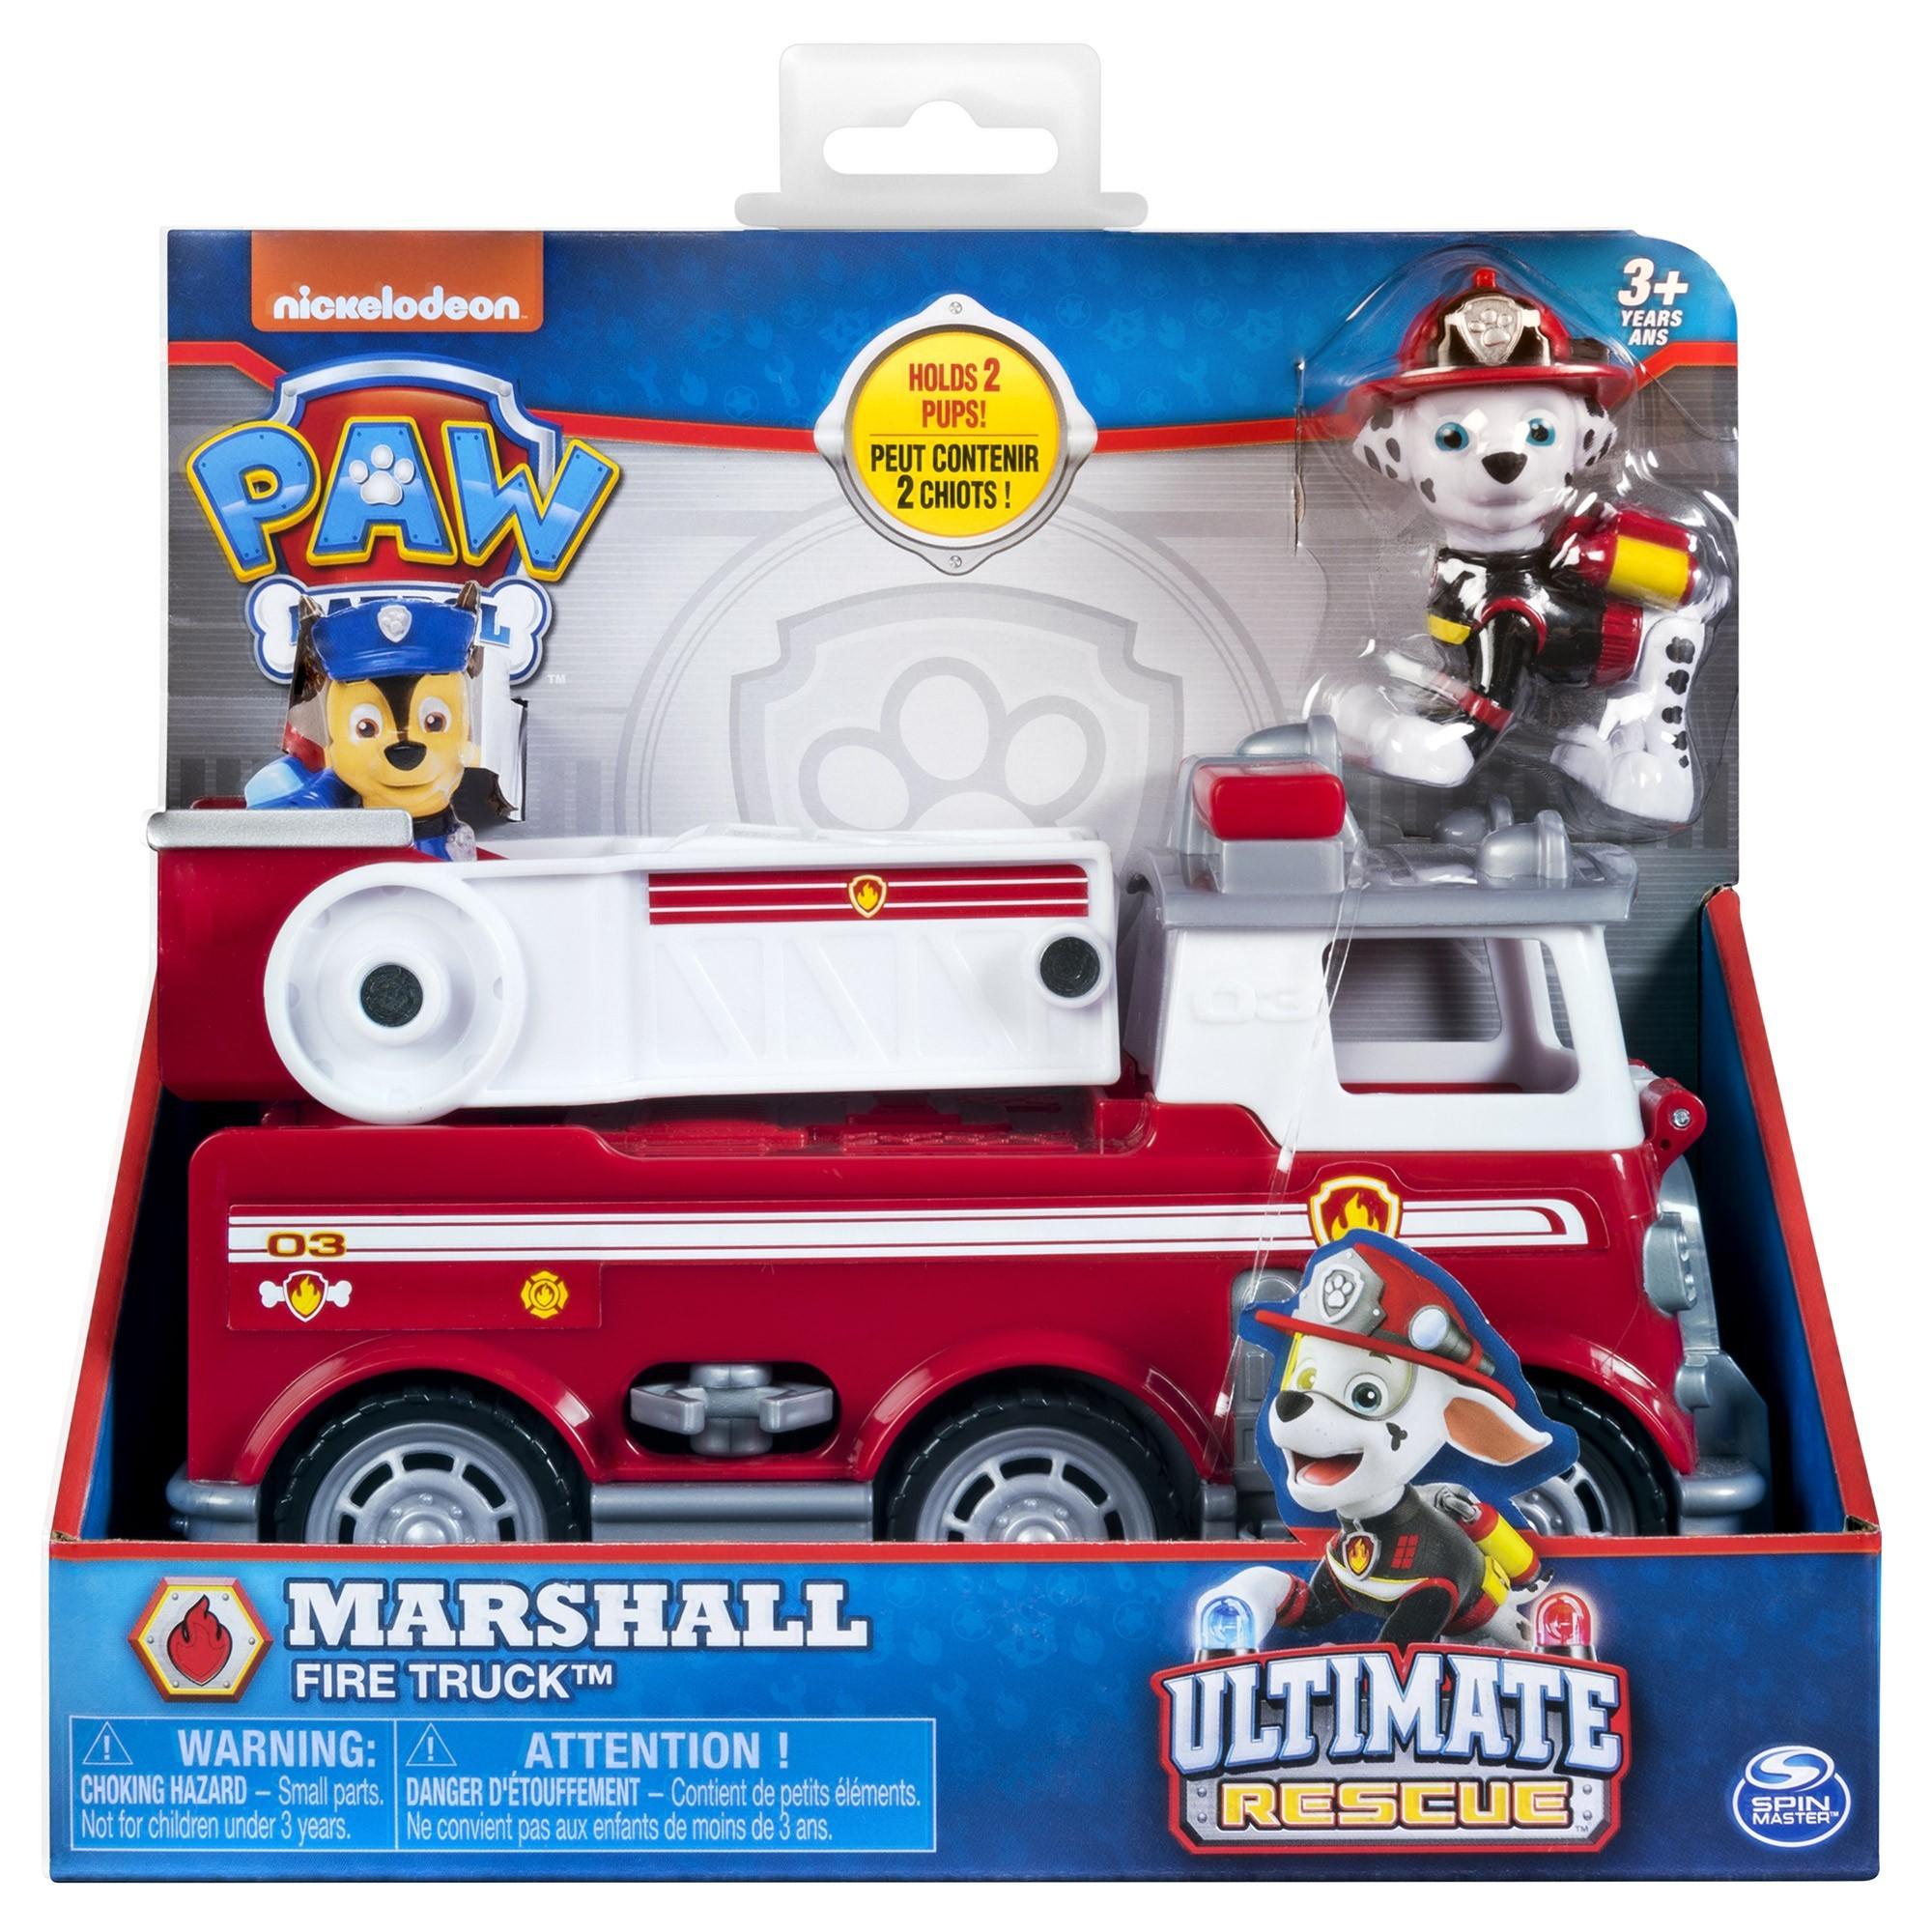 paw patrol ultimate fire rescue truck